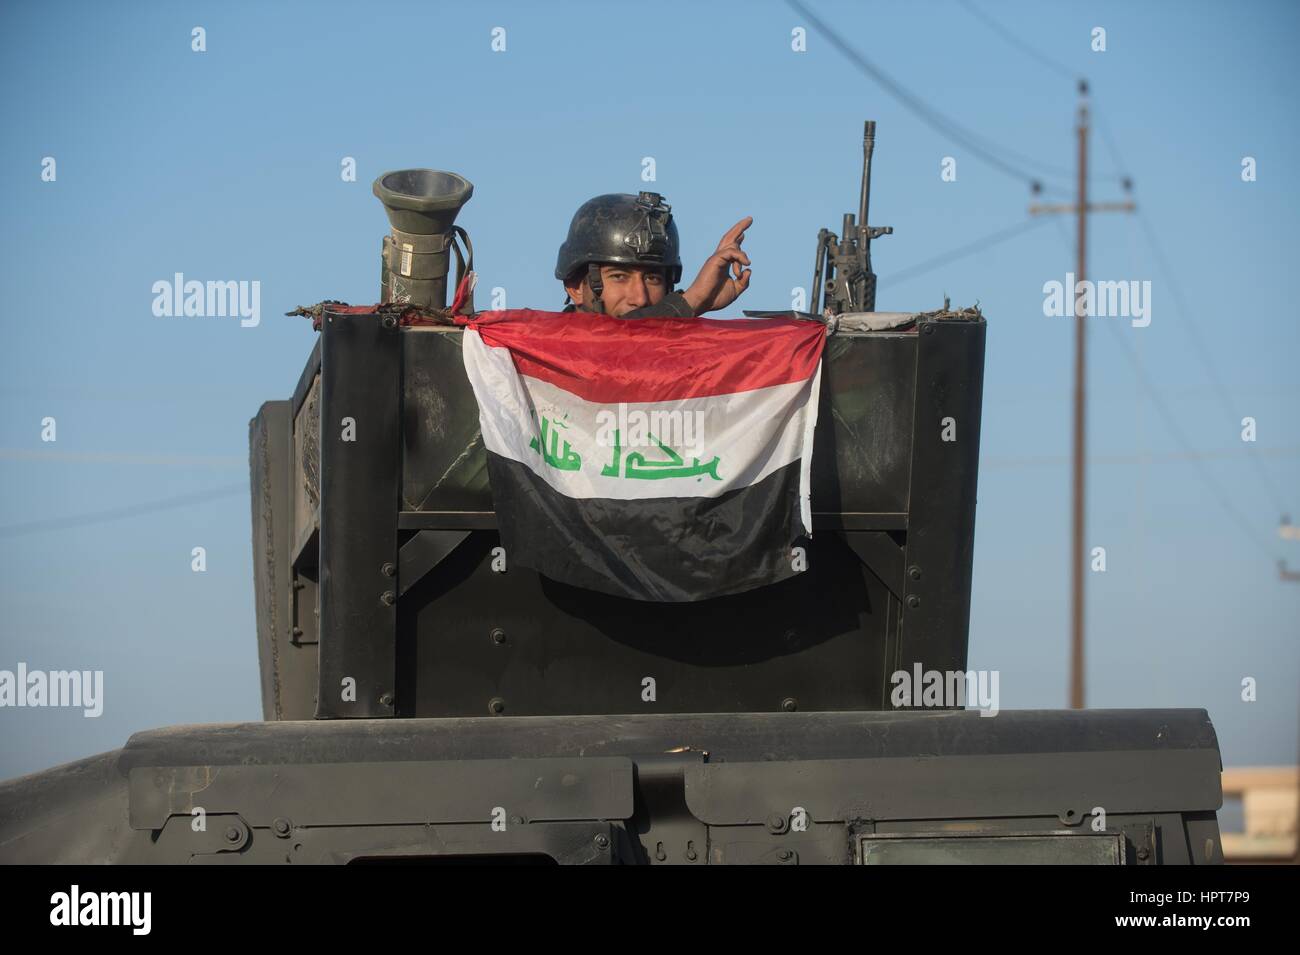 Mosul, Iraq. 23rd Feb, 2017. An Iraqi Special Forces soldier waves in a convoy heading to the frontline as the Iraq government continues to capture territory from ISIS February 23, 2017 in Mosul, Iraq. Iraqi forces moved into western Mosul taking full control of the international airport on the southwestern edge of the city. Credit: Planetpix/Alamy Live News Stock Photo